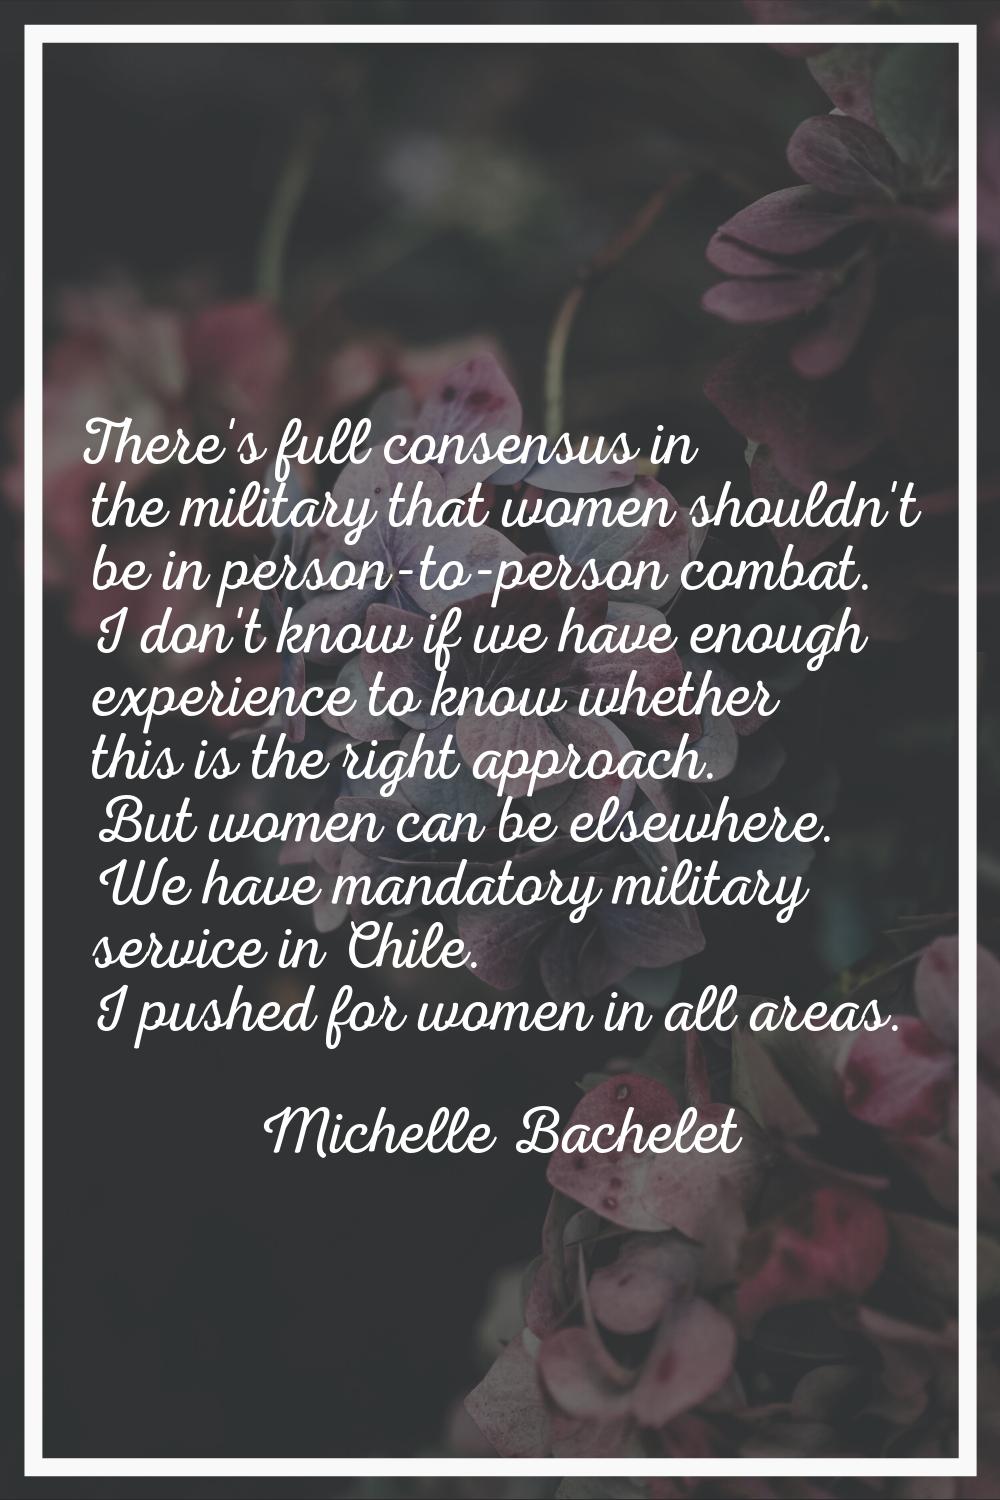 There's full consensus in the military that women shouldn't be in person-to-person combat. I don't 